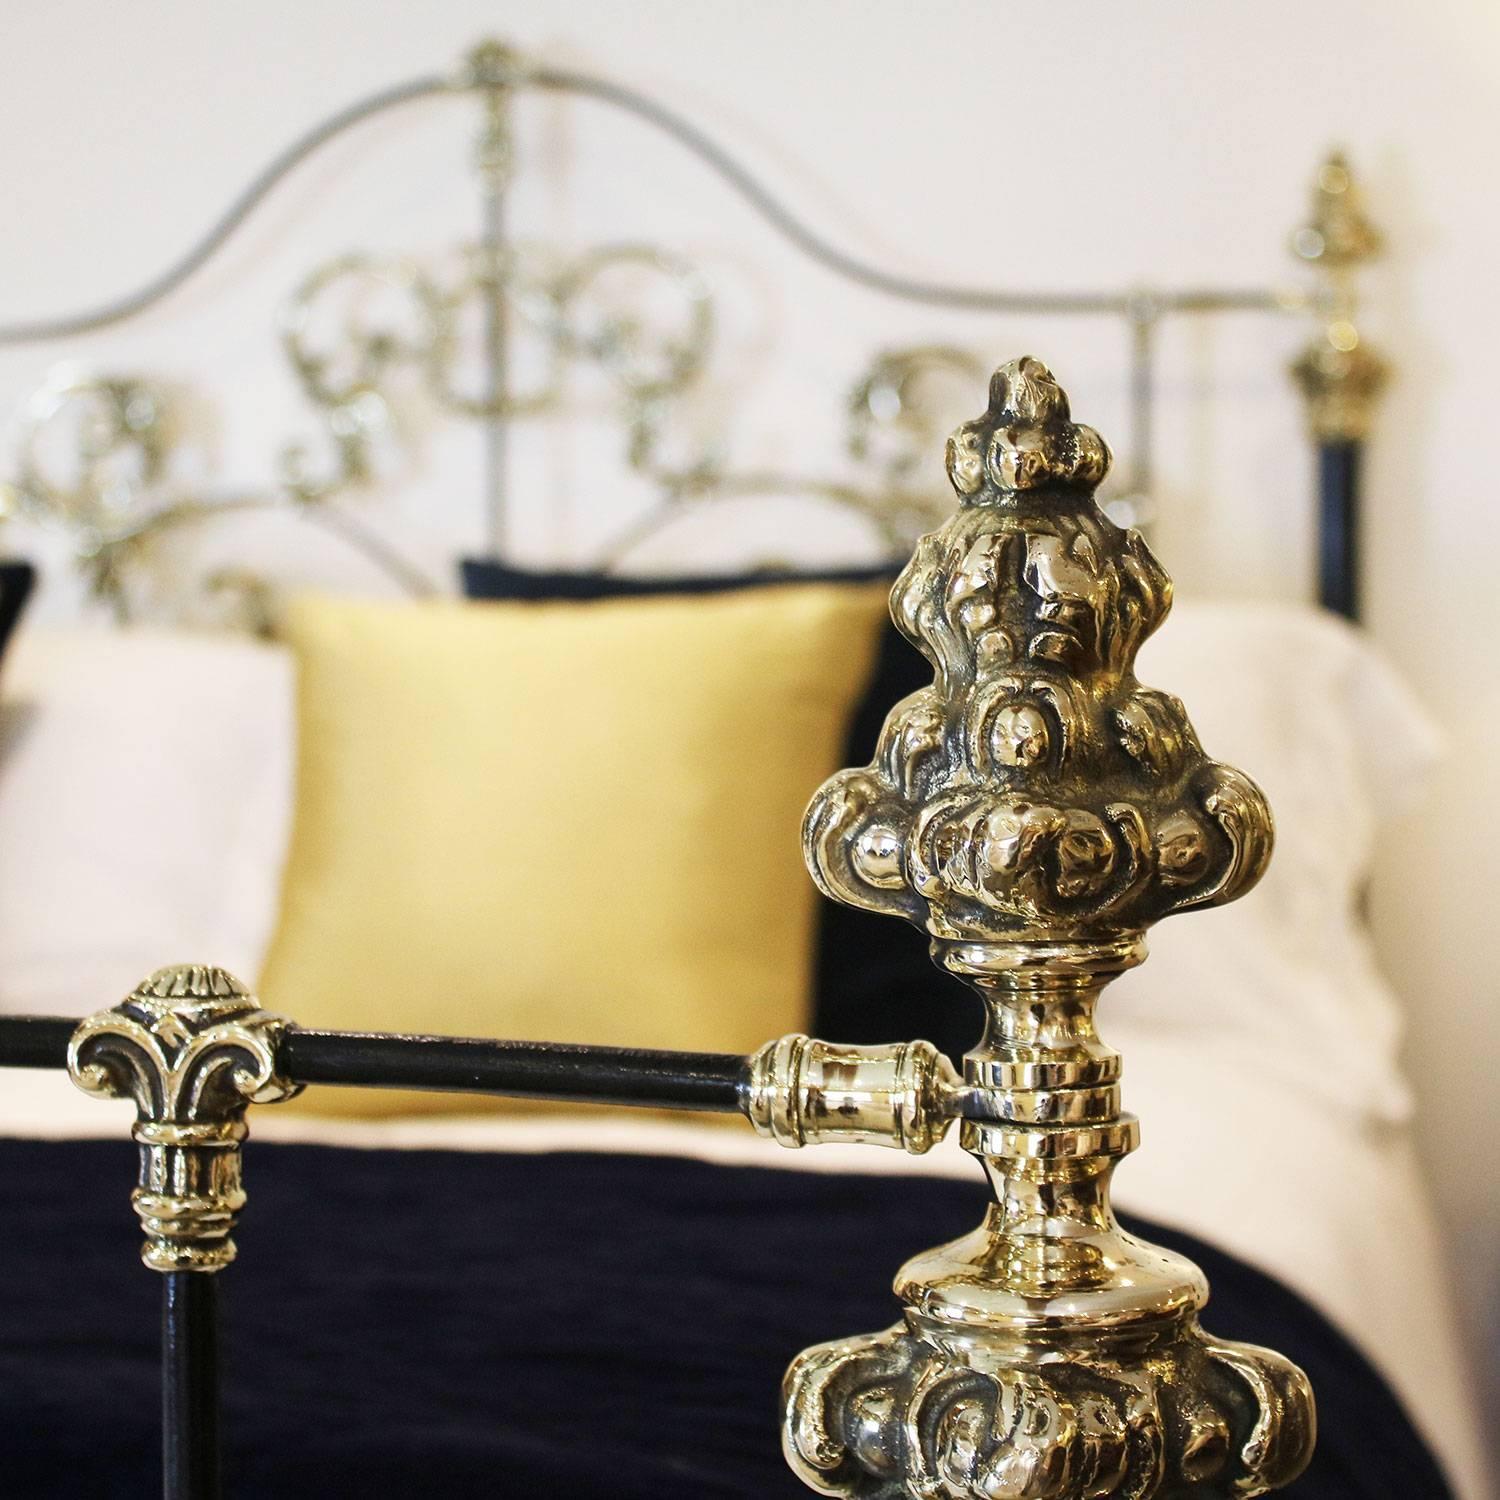 Moroccan Bespoke Brass and Iron Tangier Bed - Tangier 1